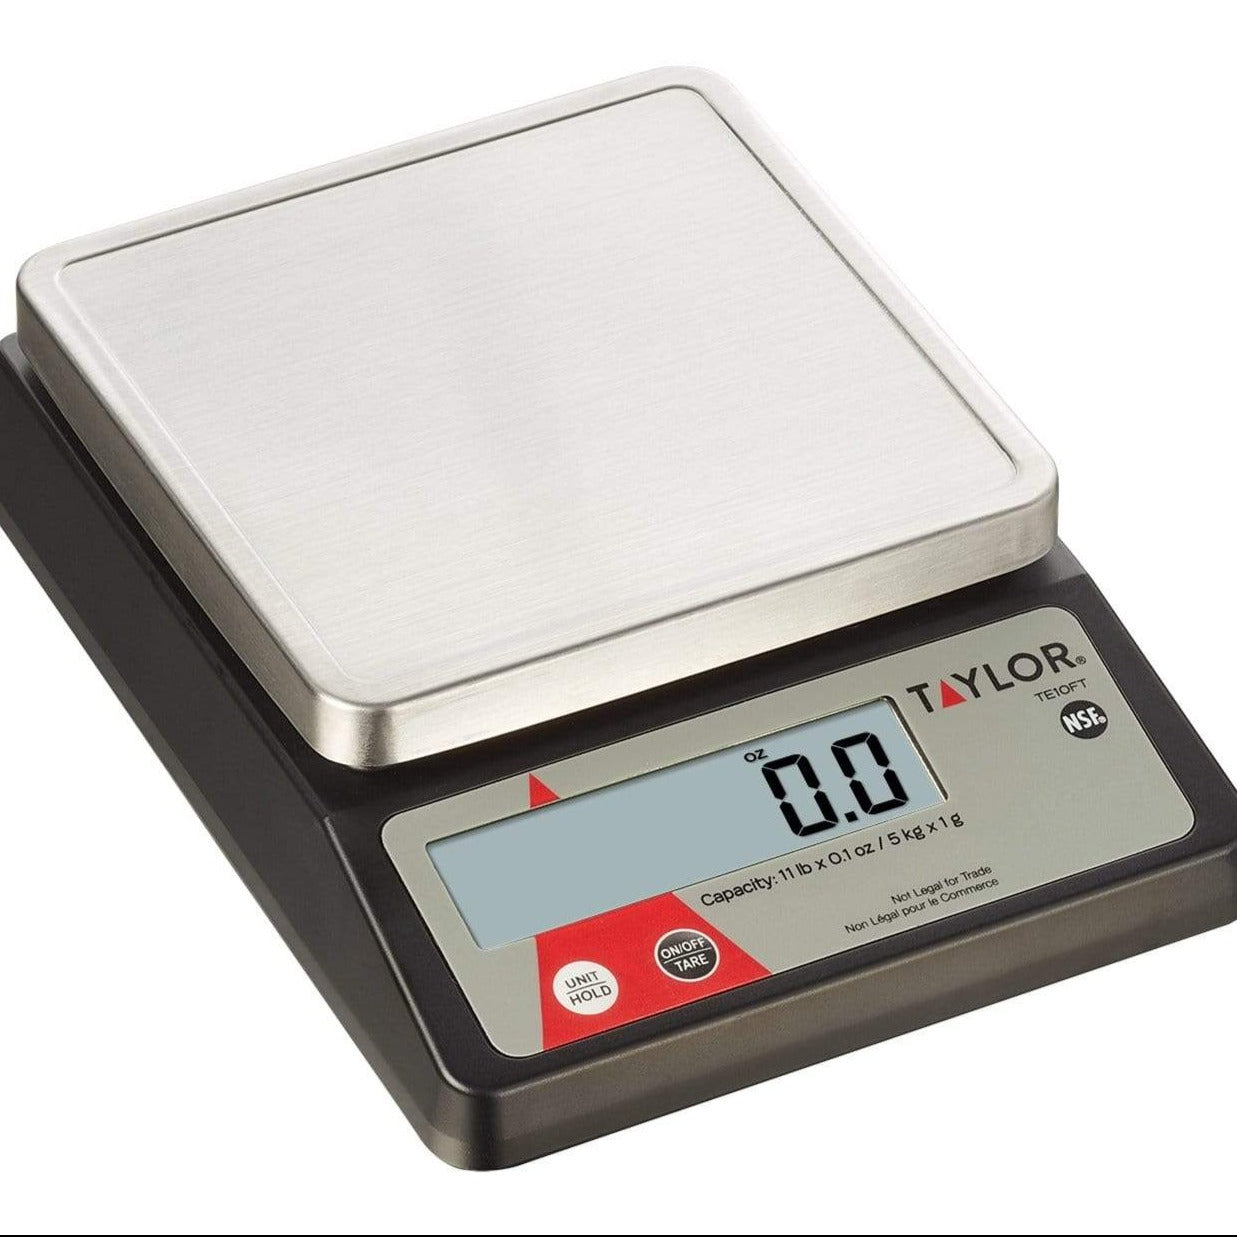 Scale Kitchen Food Weight Grams Digital Accurate Meat Cooking